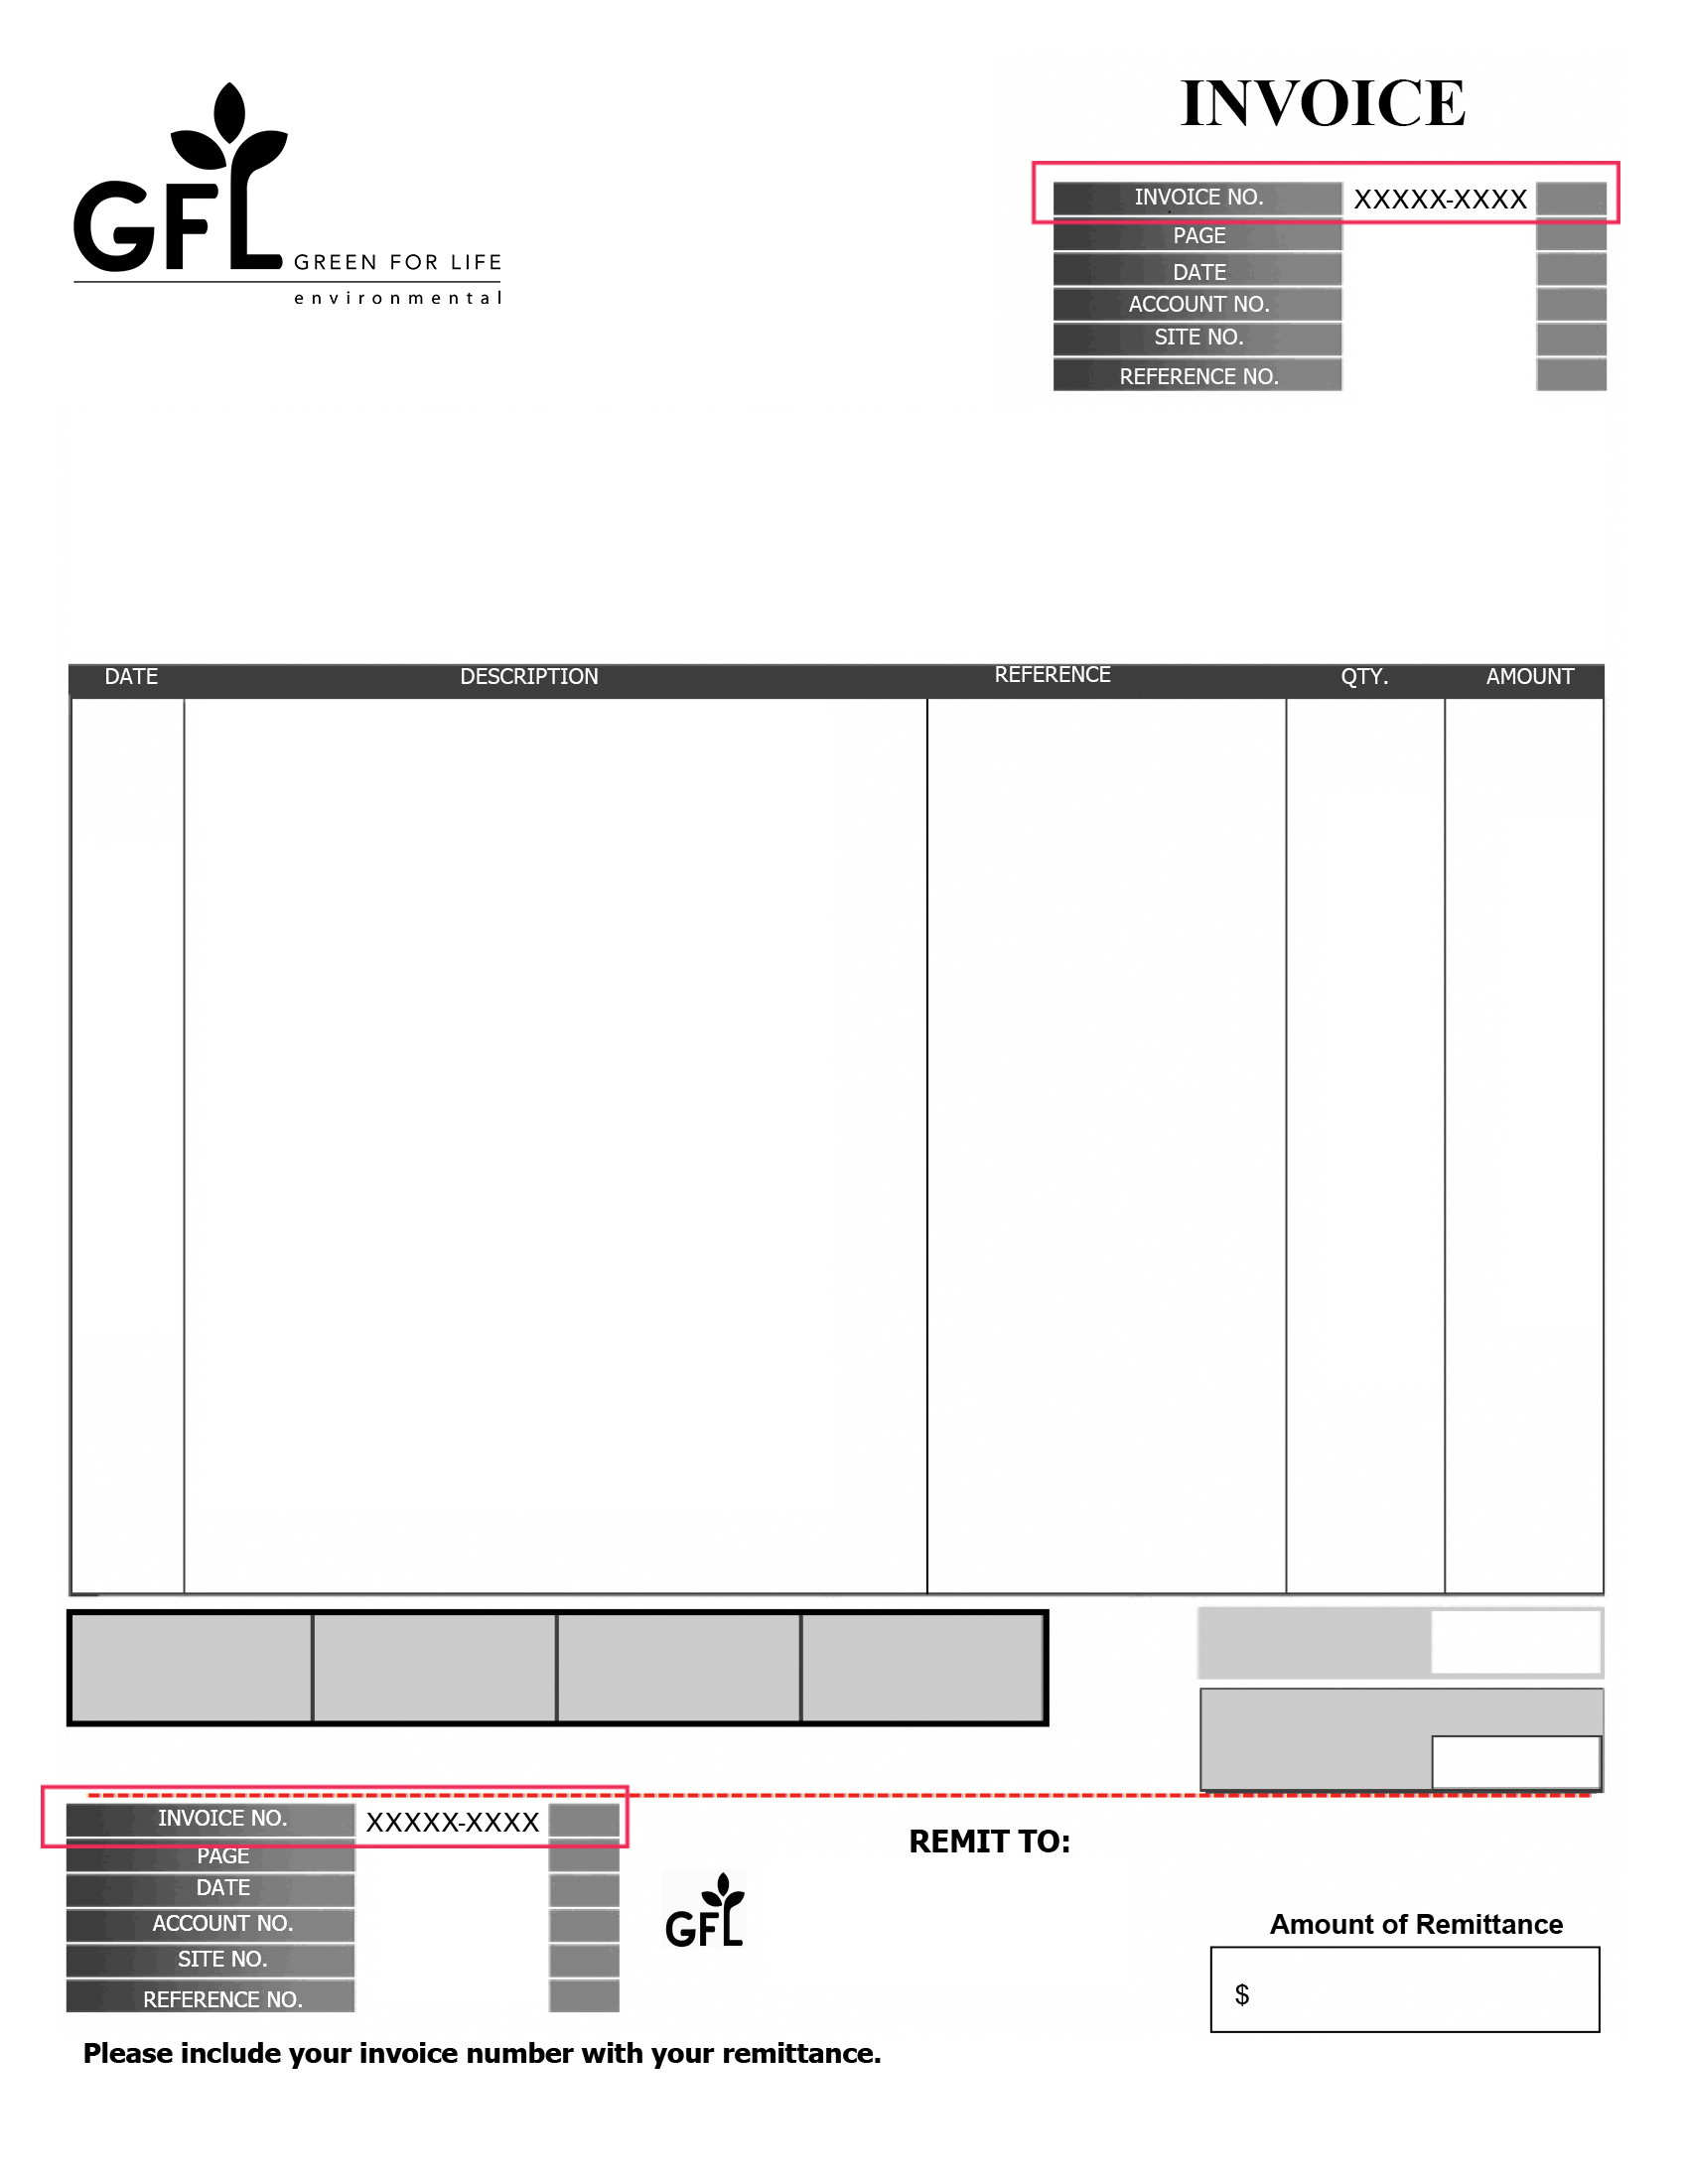 Here's a sample of your new invoice!